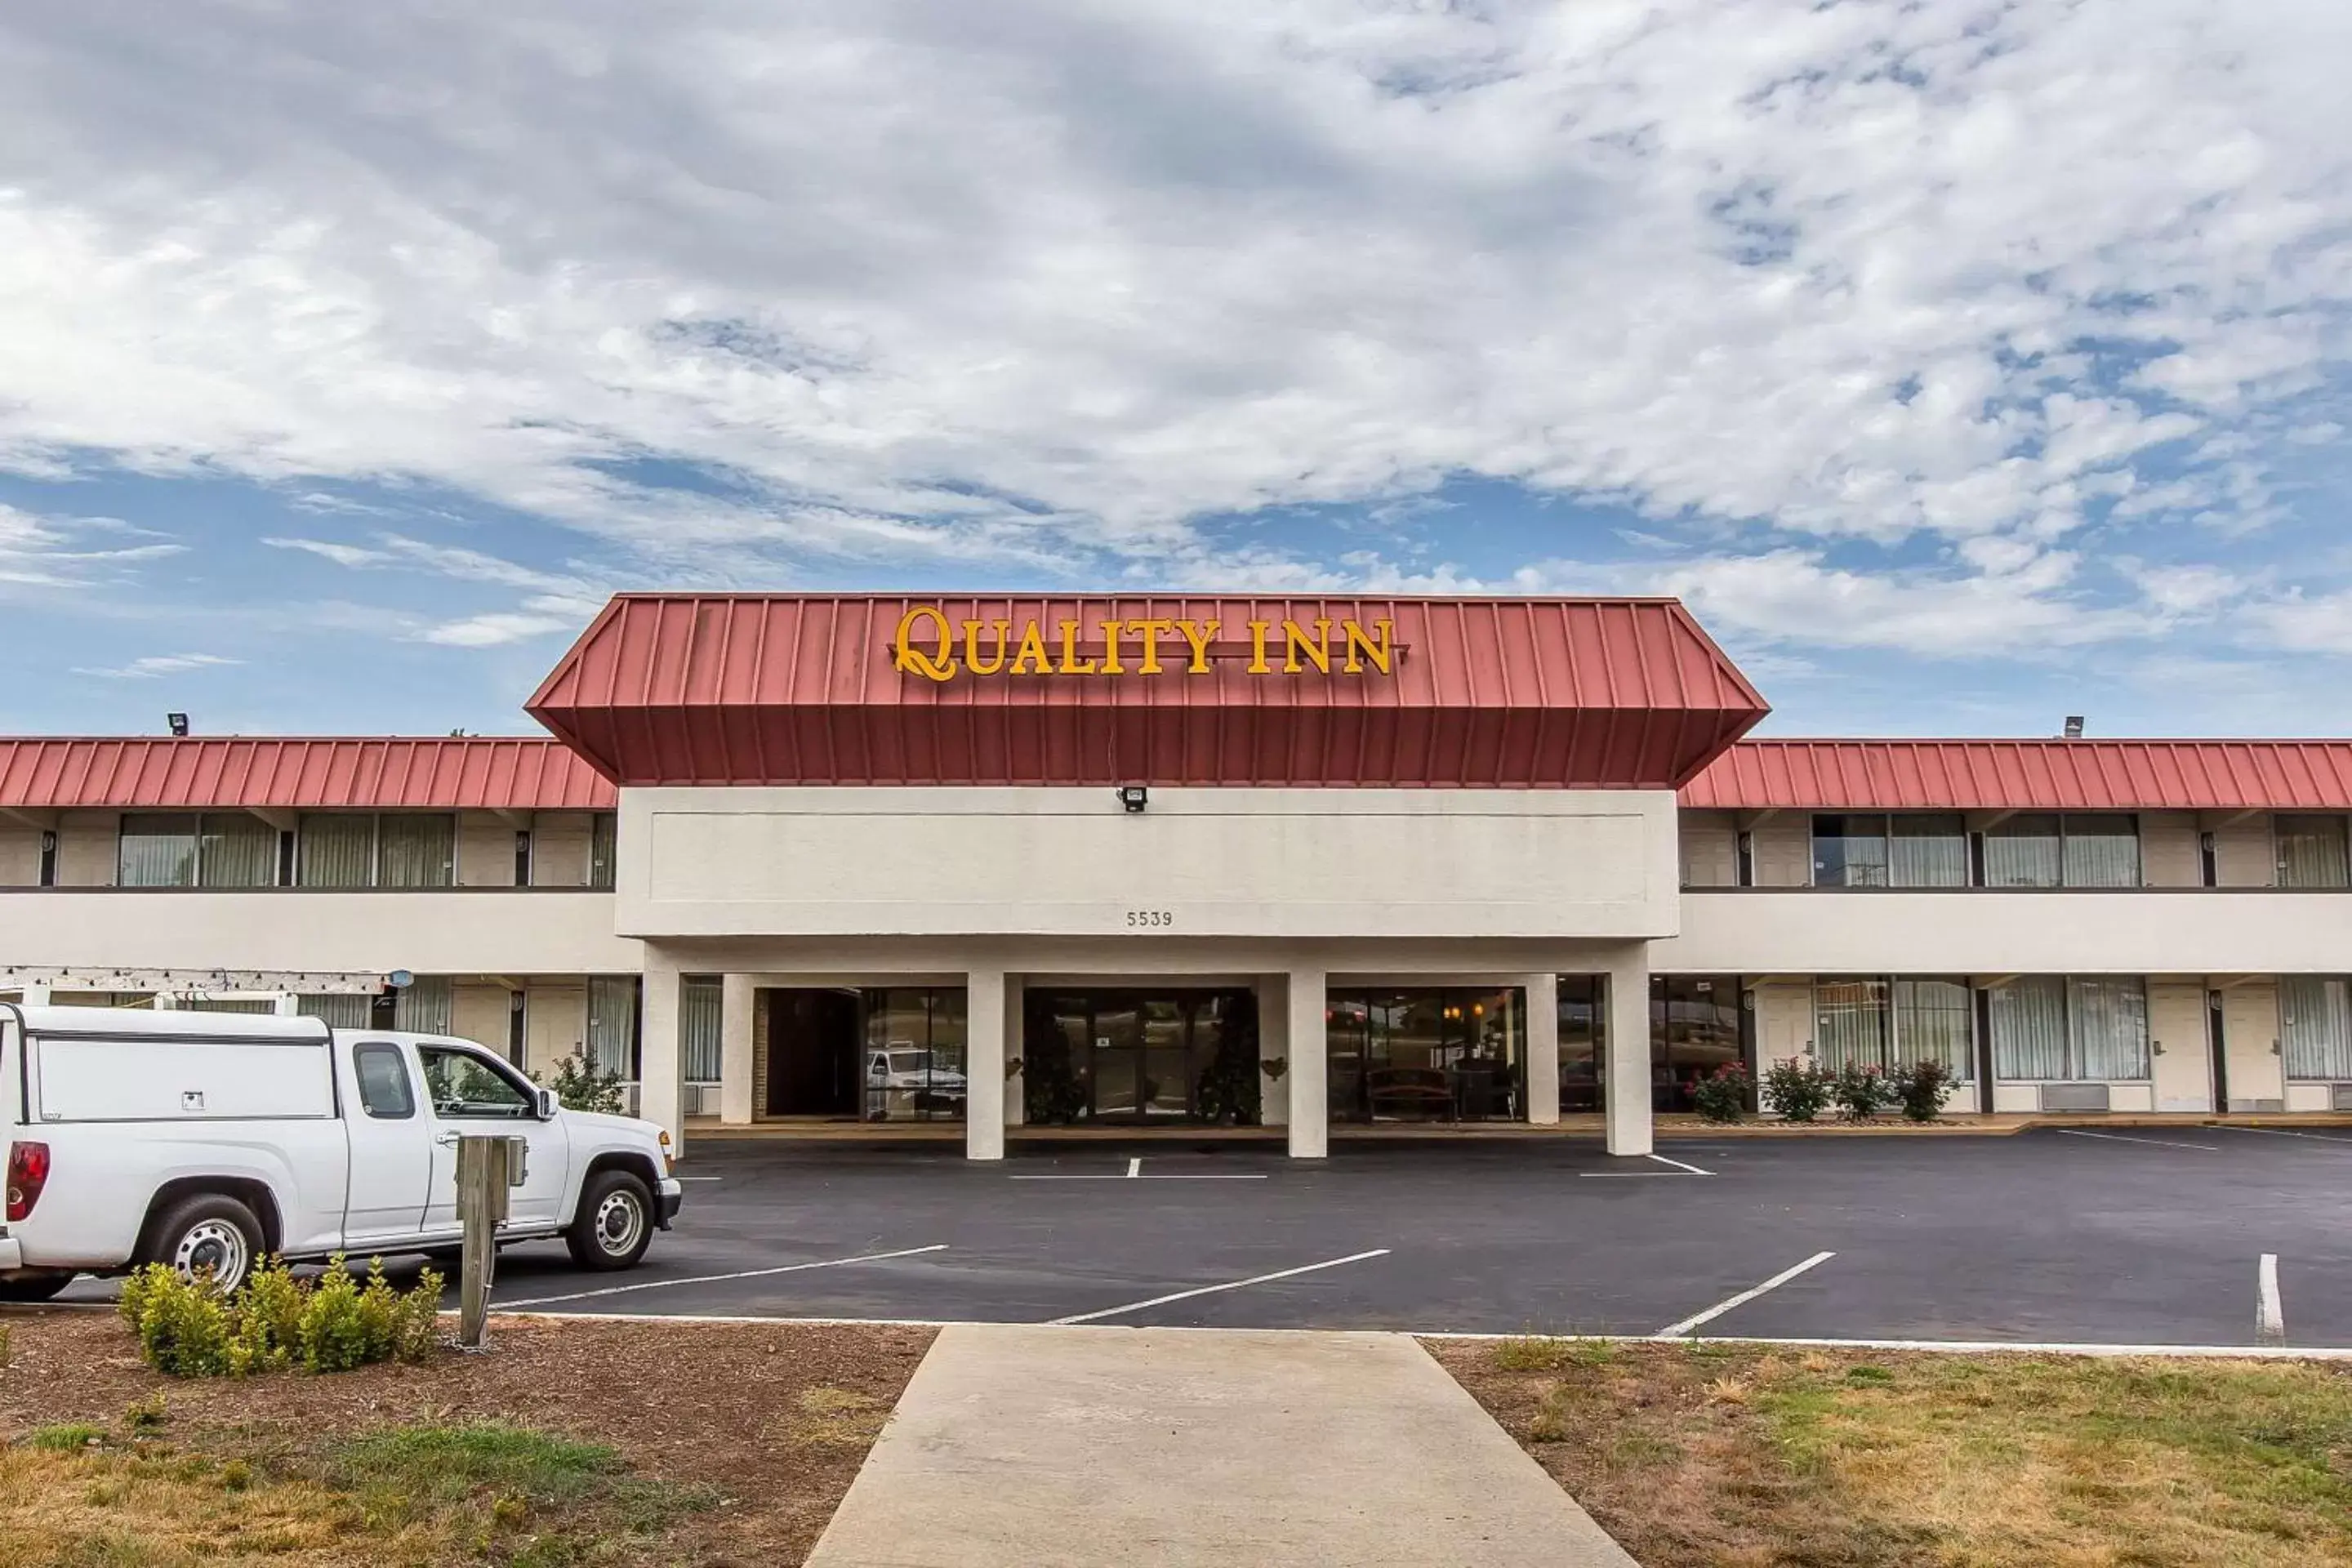 Property building in Quality Inn Easley